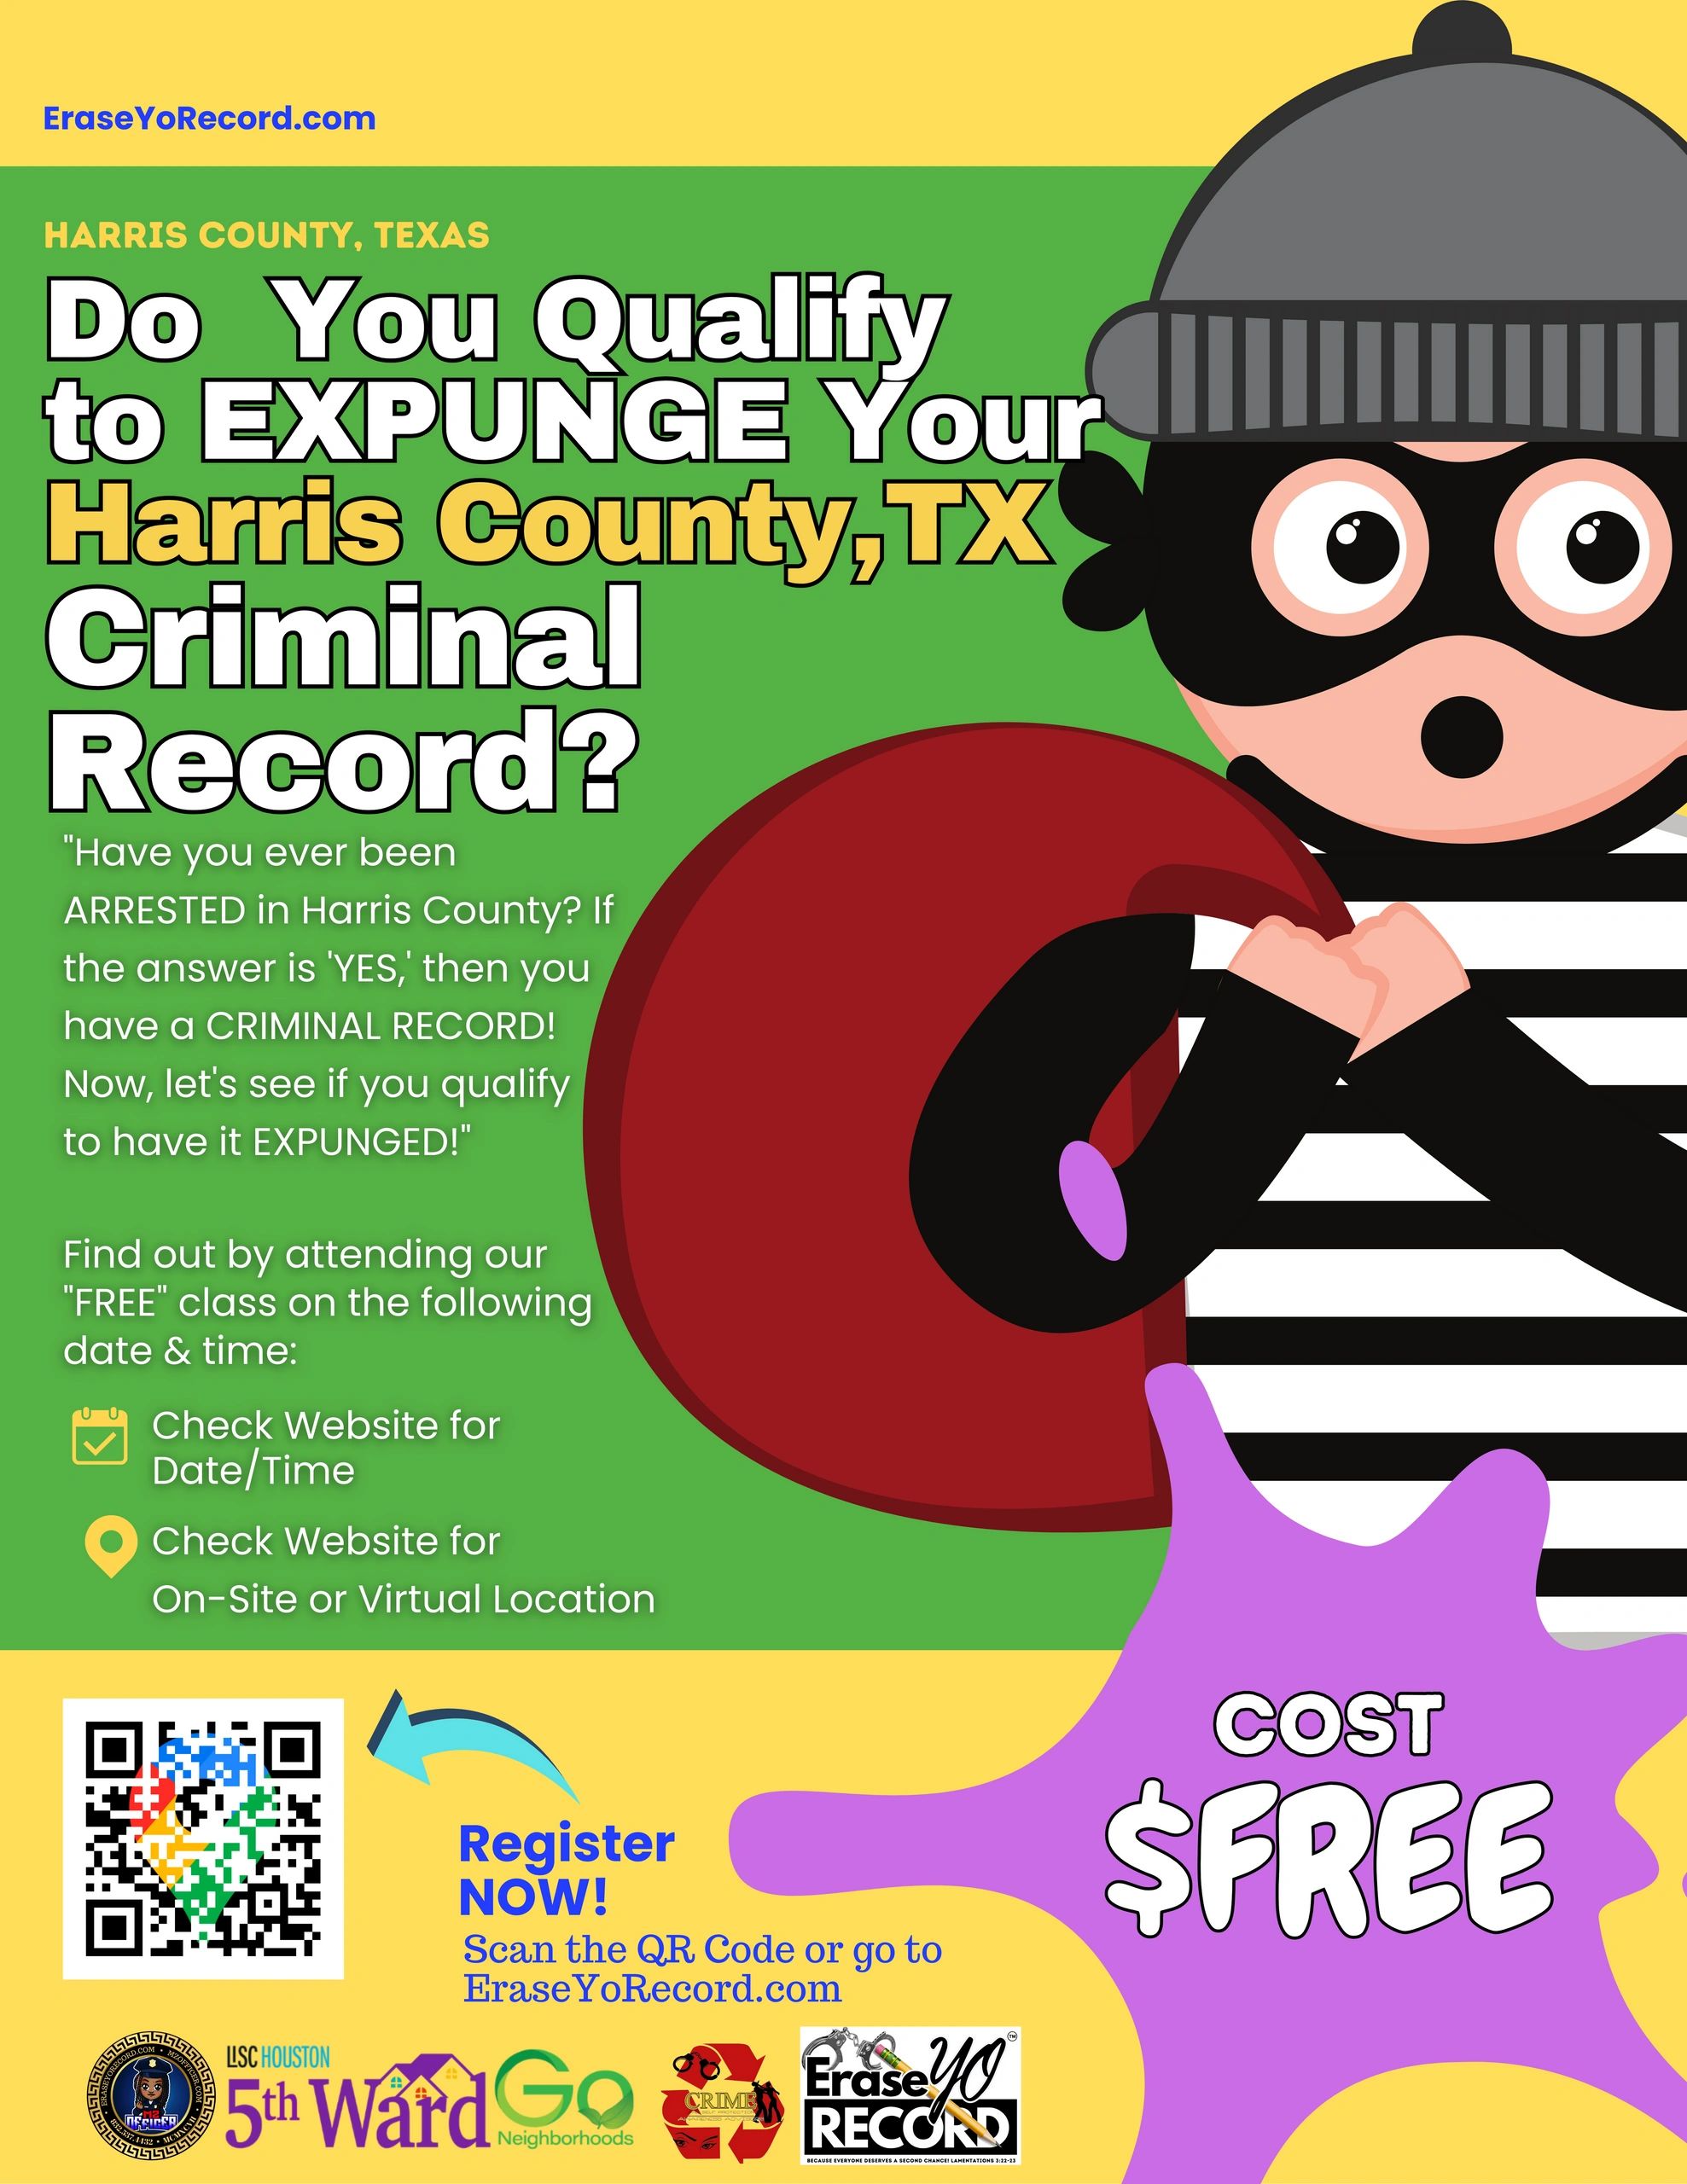 
An ad promotes a free expungement class in Harris County, TX, with a cartoon burglar and a QR code.